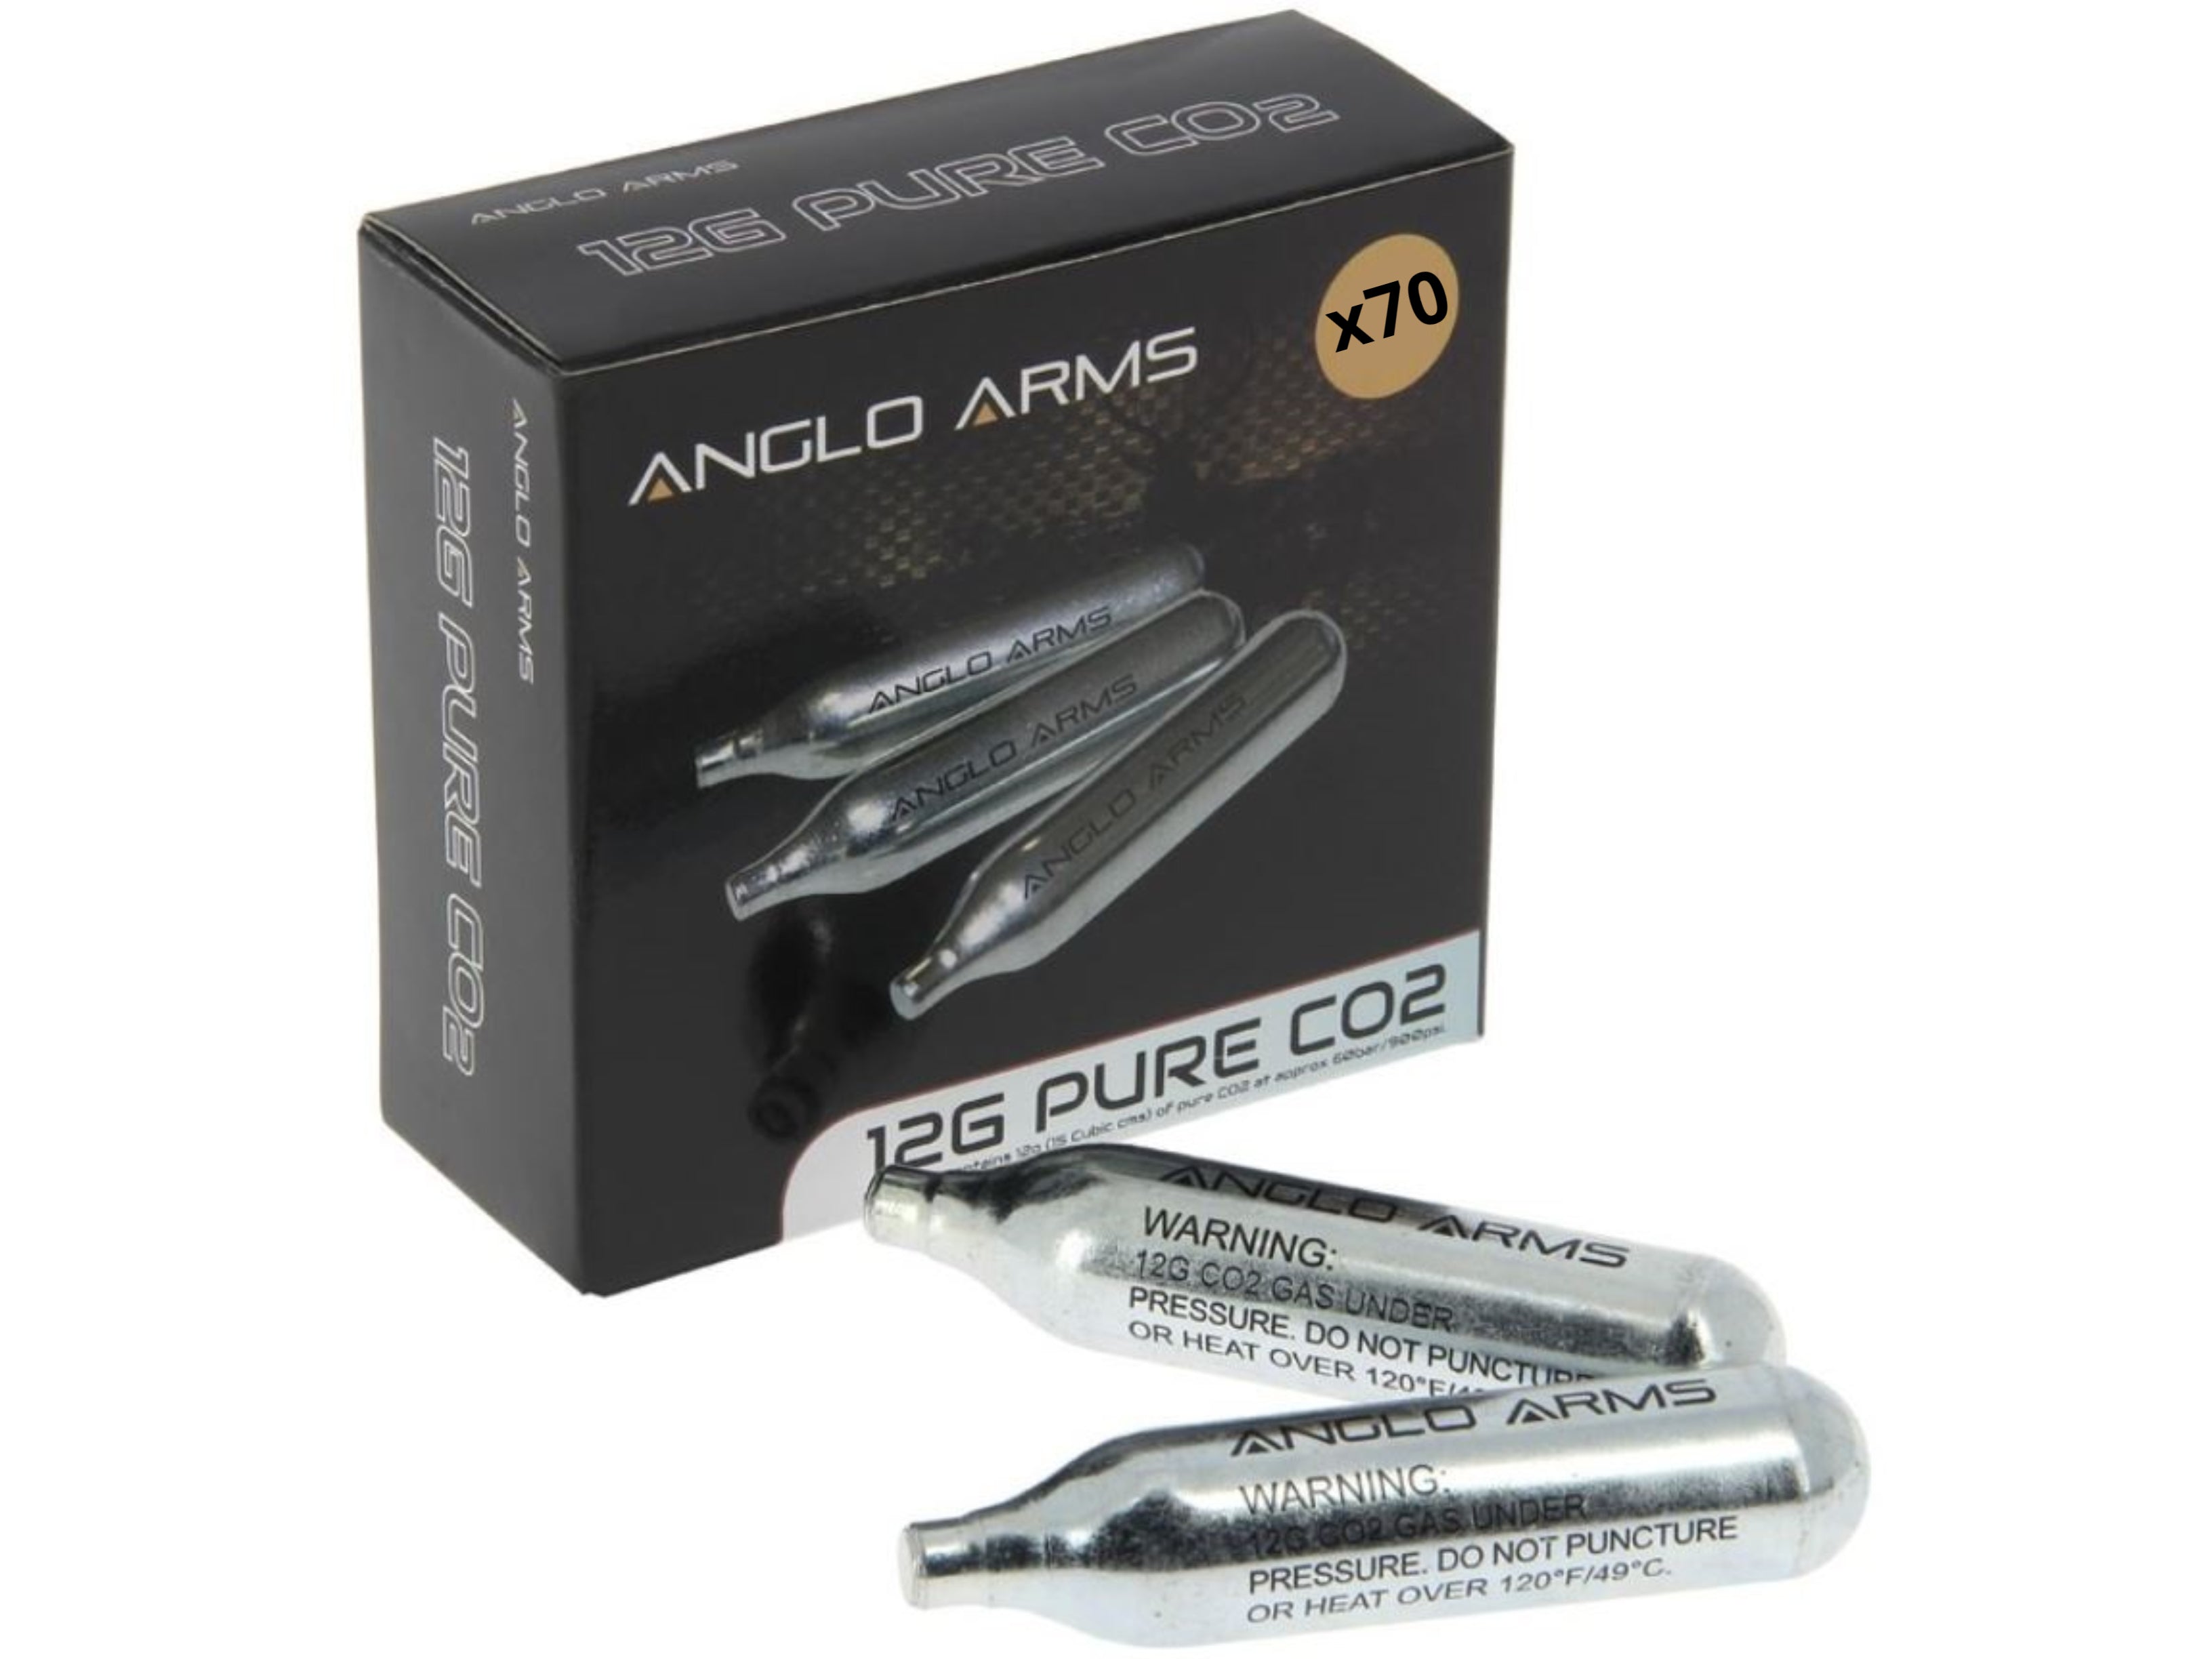 ANGLO ARMS 70 X ANGLO ARMS 12G GRAM CO2 CAPSULE CARTRIDGE SET